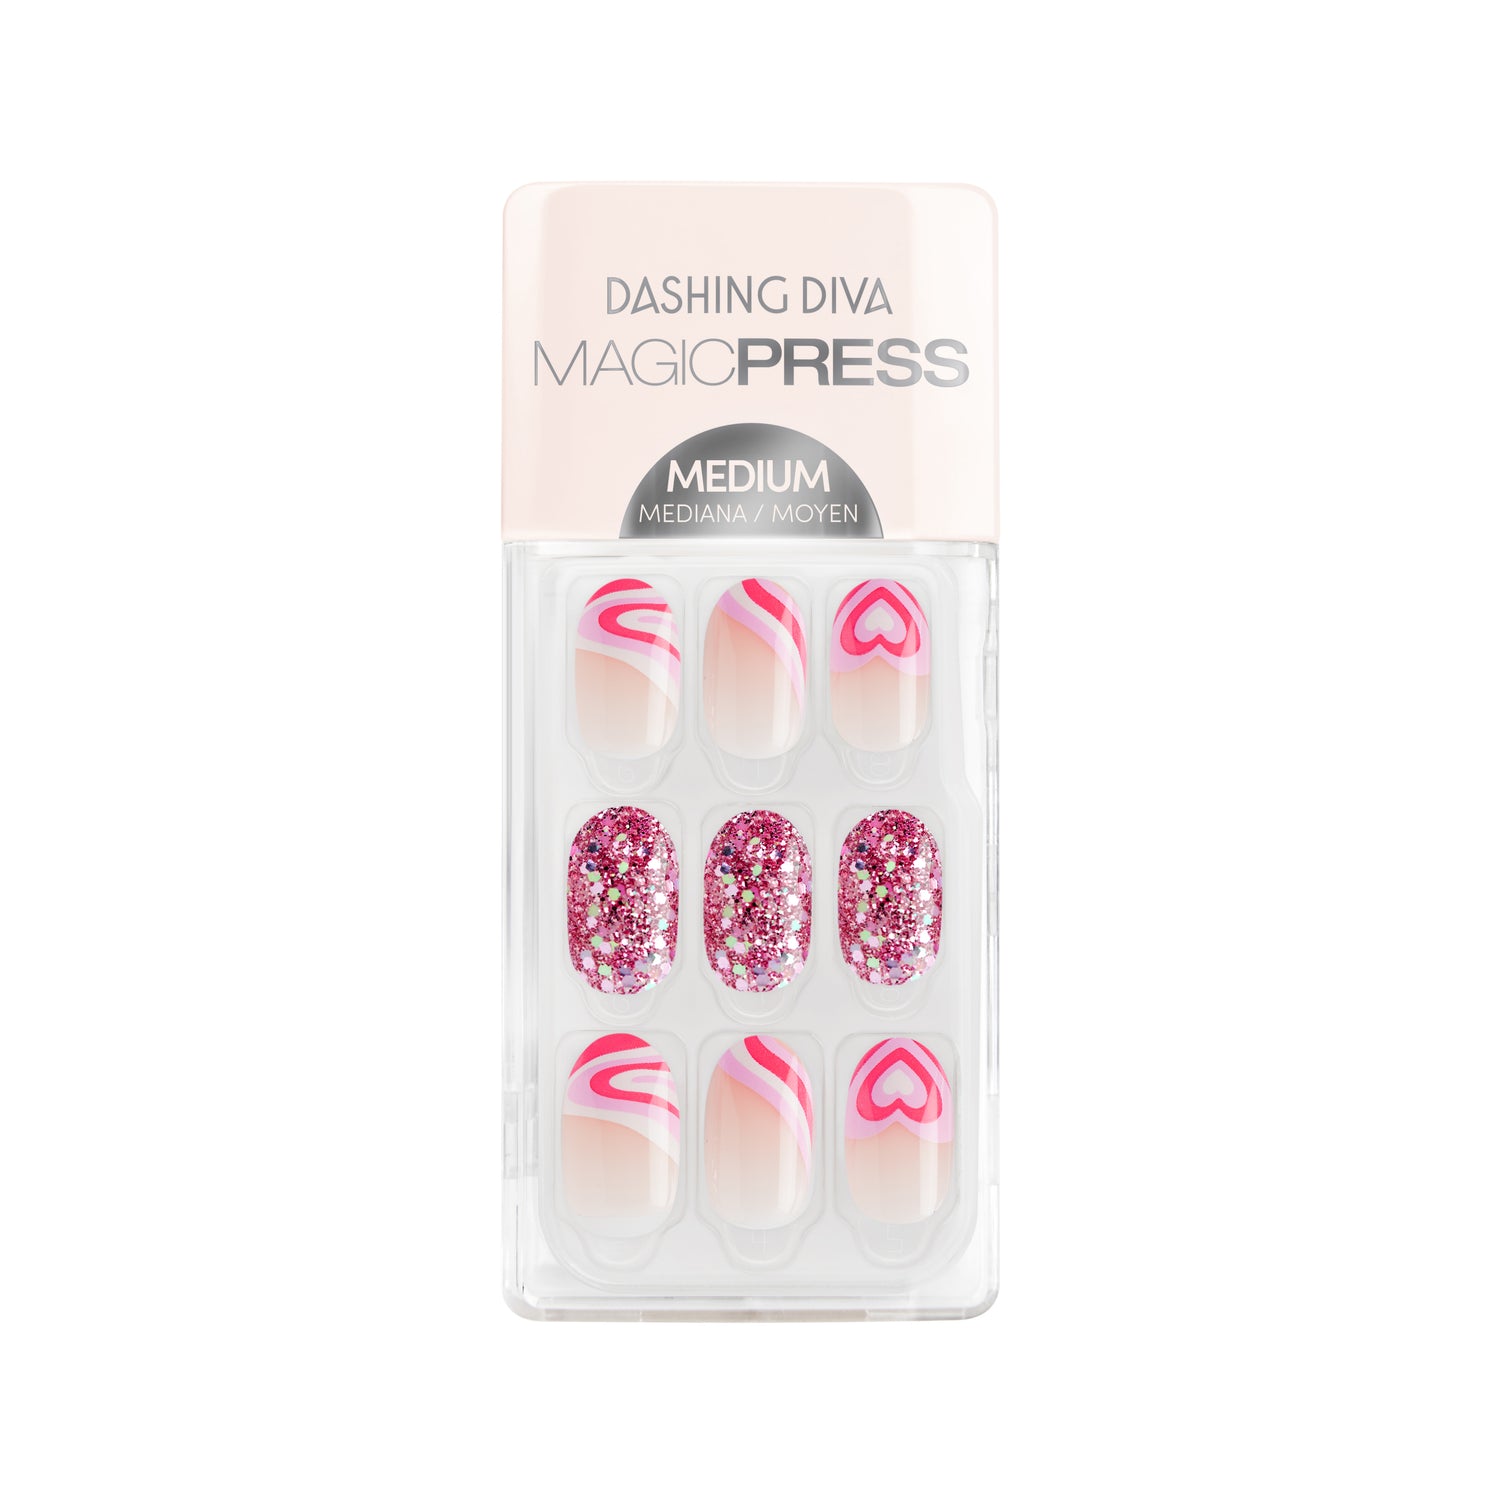 Medium length, oval shape, glossy finish nude press-on nails. Featuring pink glitter accents and a French tip swirl in pink, white and red.